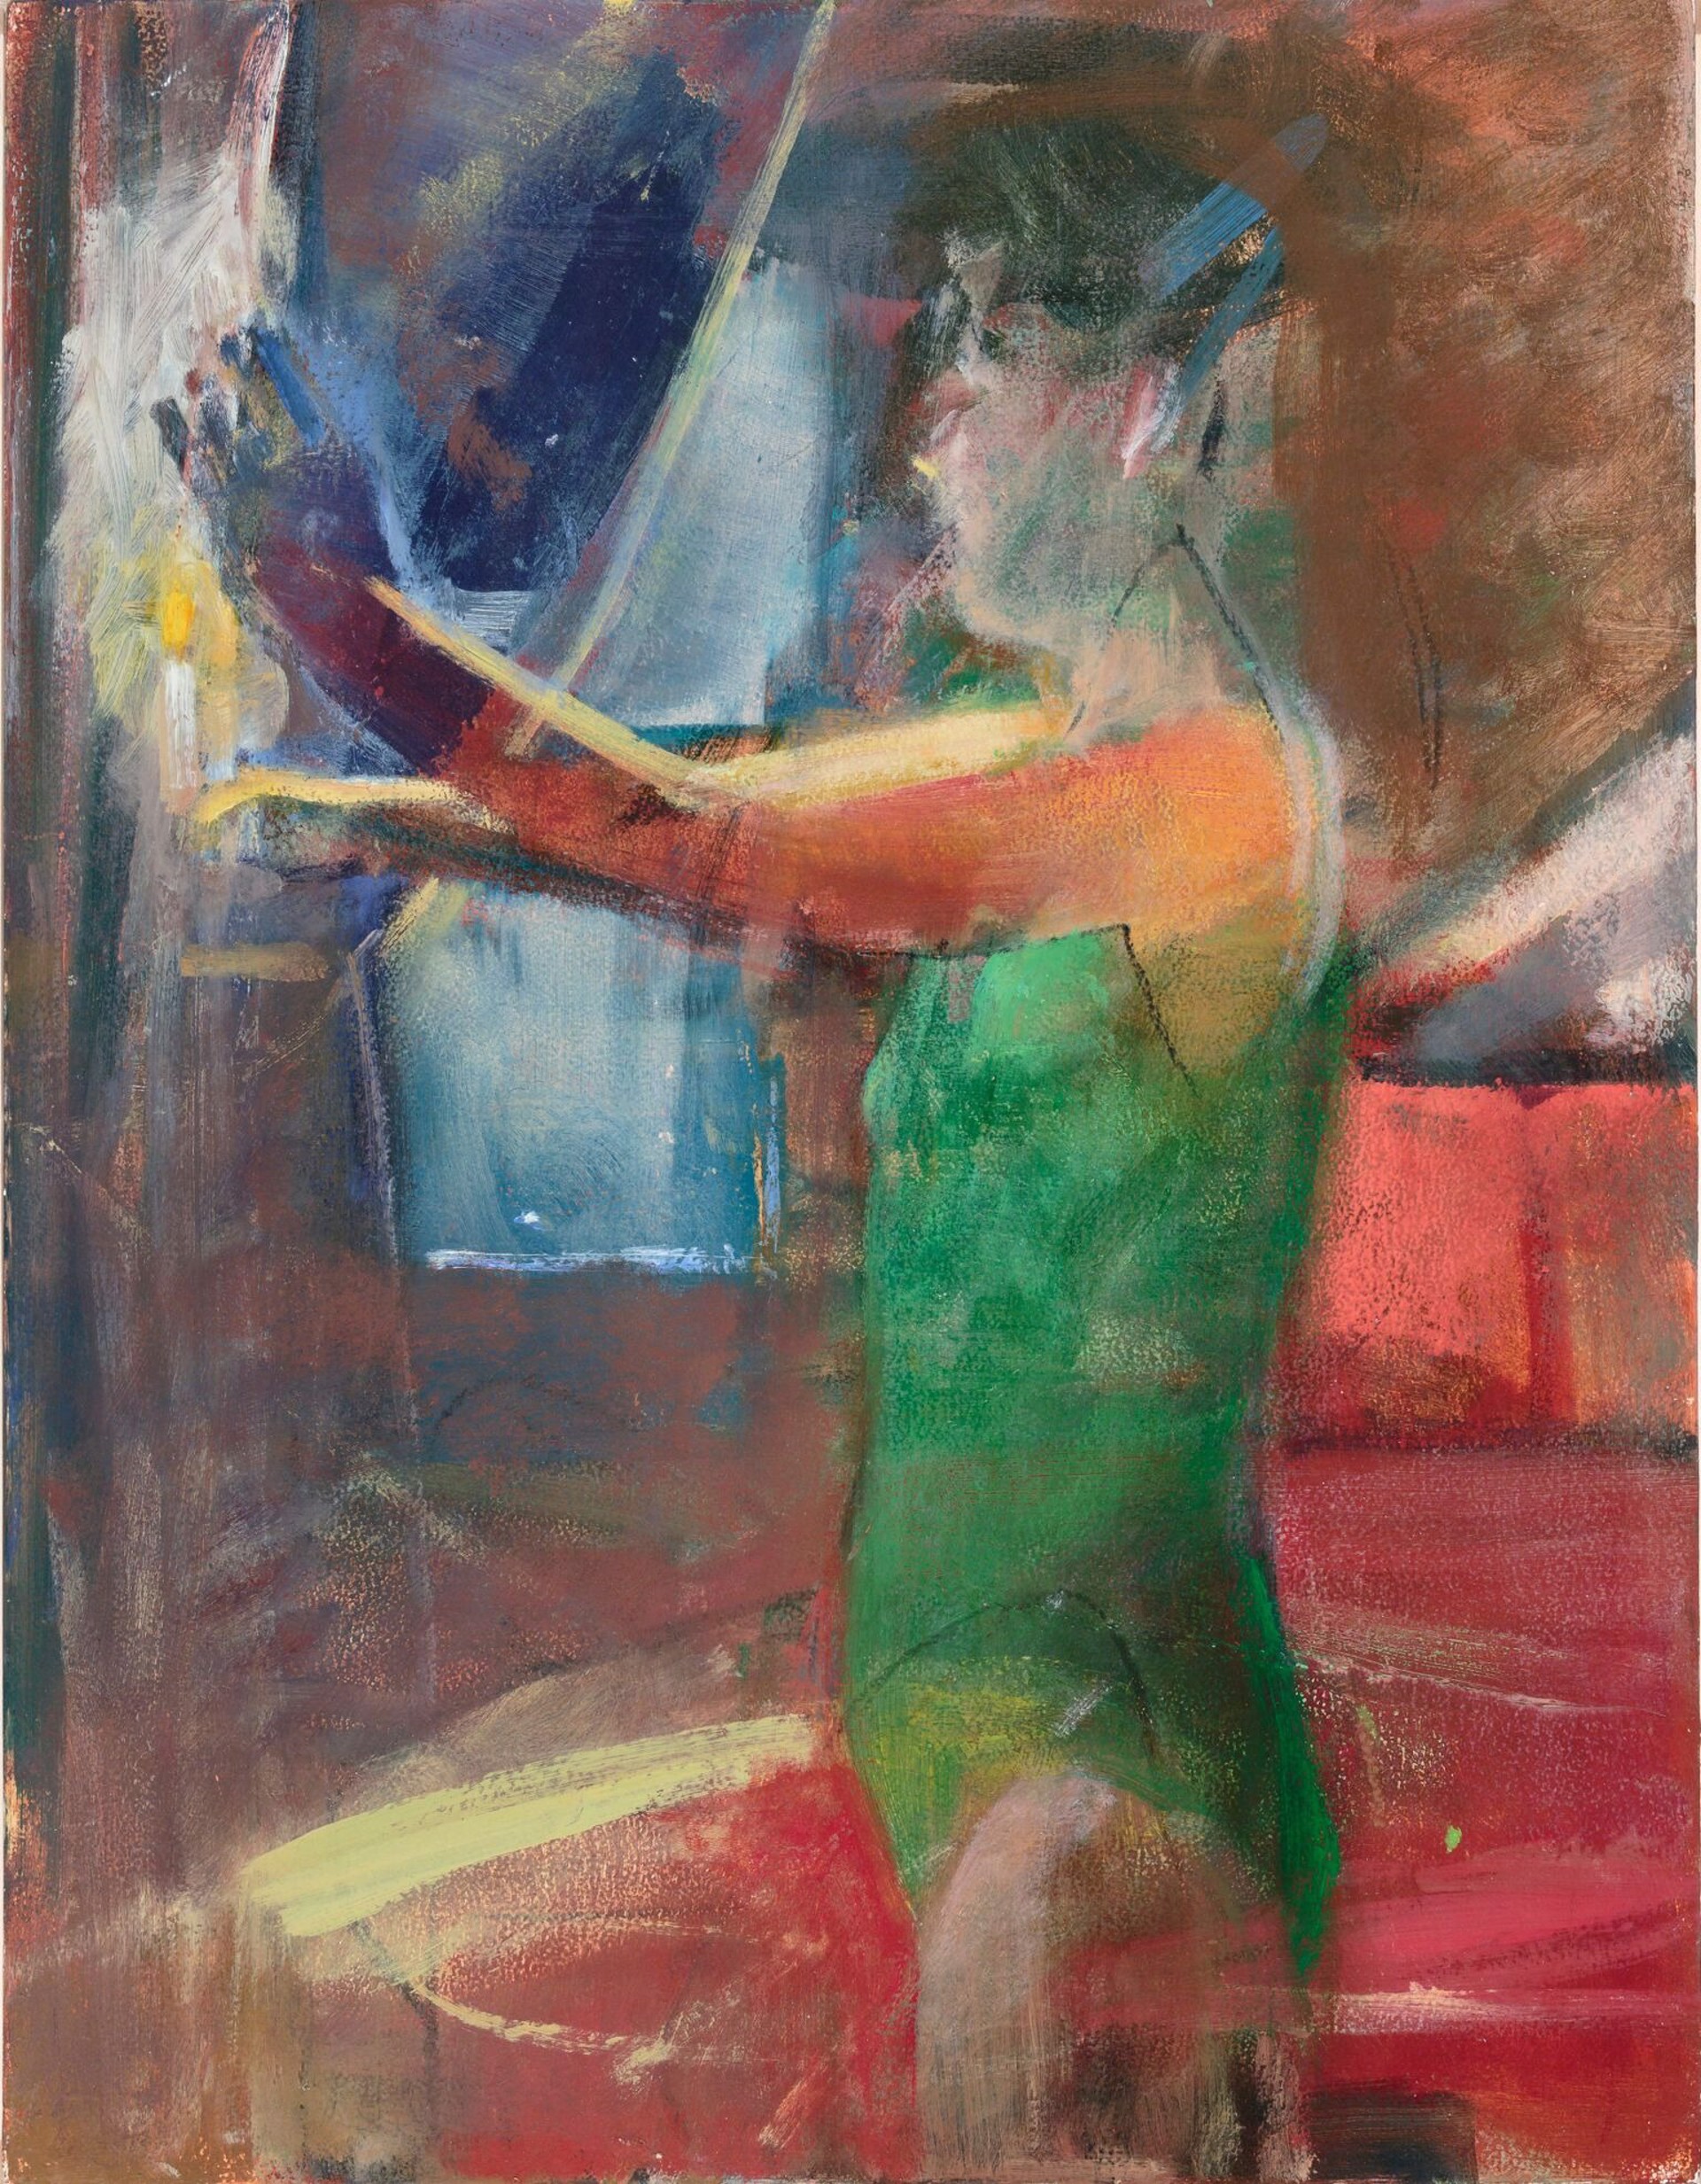 Woman with Candle by Donald Beal